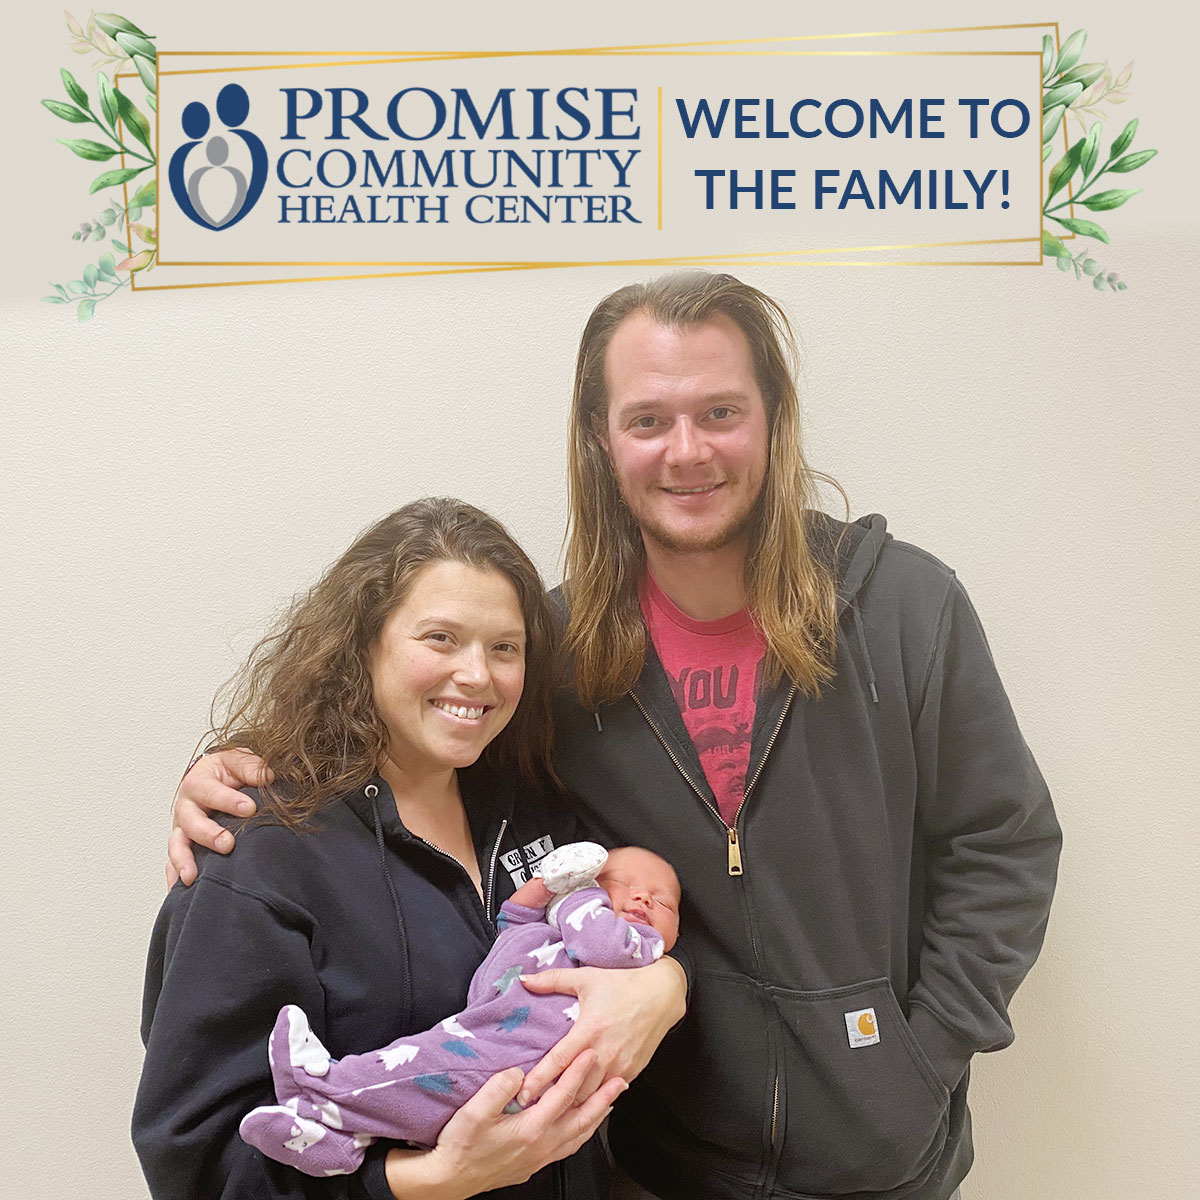 Stinger Family home birth in Sioux Falls, SD | Promise Community Health Center in Sioux Center, Iowa | Home births in northwest Iowa, Home births in southeast South Dakota, Home births in southwest Minnesota | Home births in Sioux Falls South Dakota, Home births in Beresford South Dakota, Home births in Sioux City IA, Home births in LeMars IA, Home births in Worthington MN, Home births in Iowa, Home births in South Dakota, Home births in Minnesota